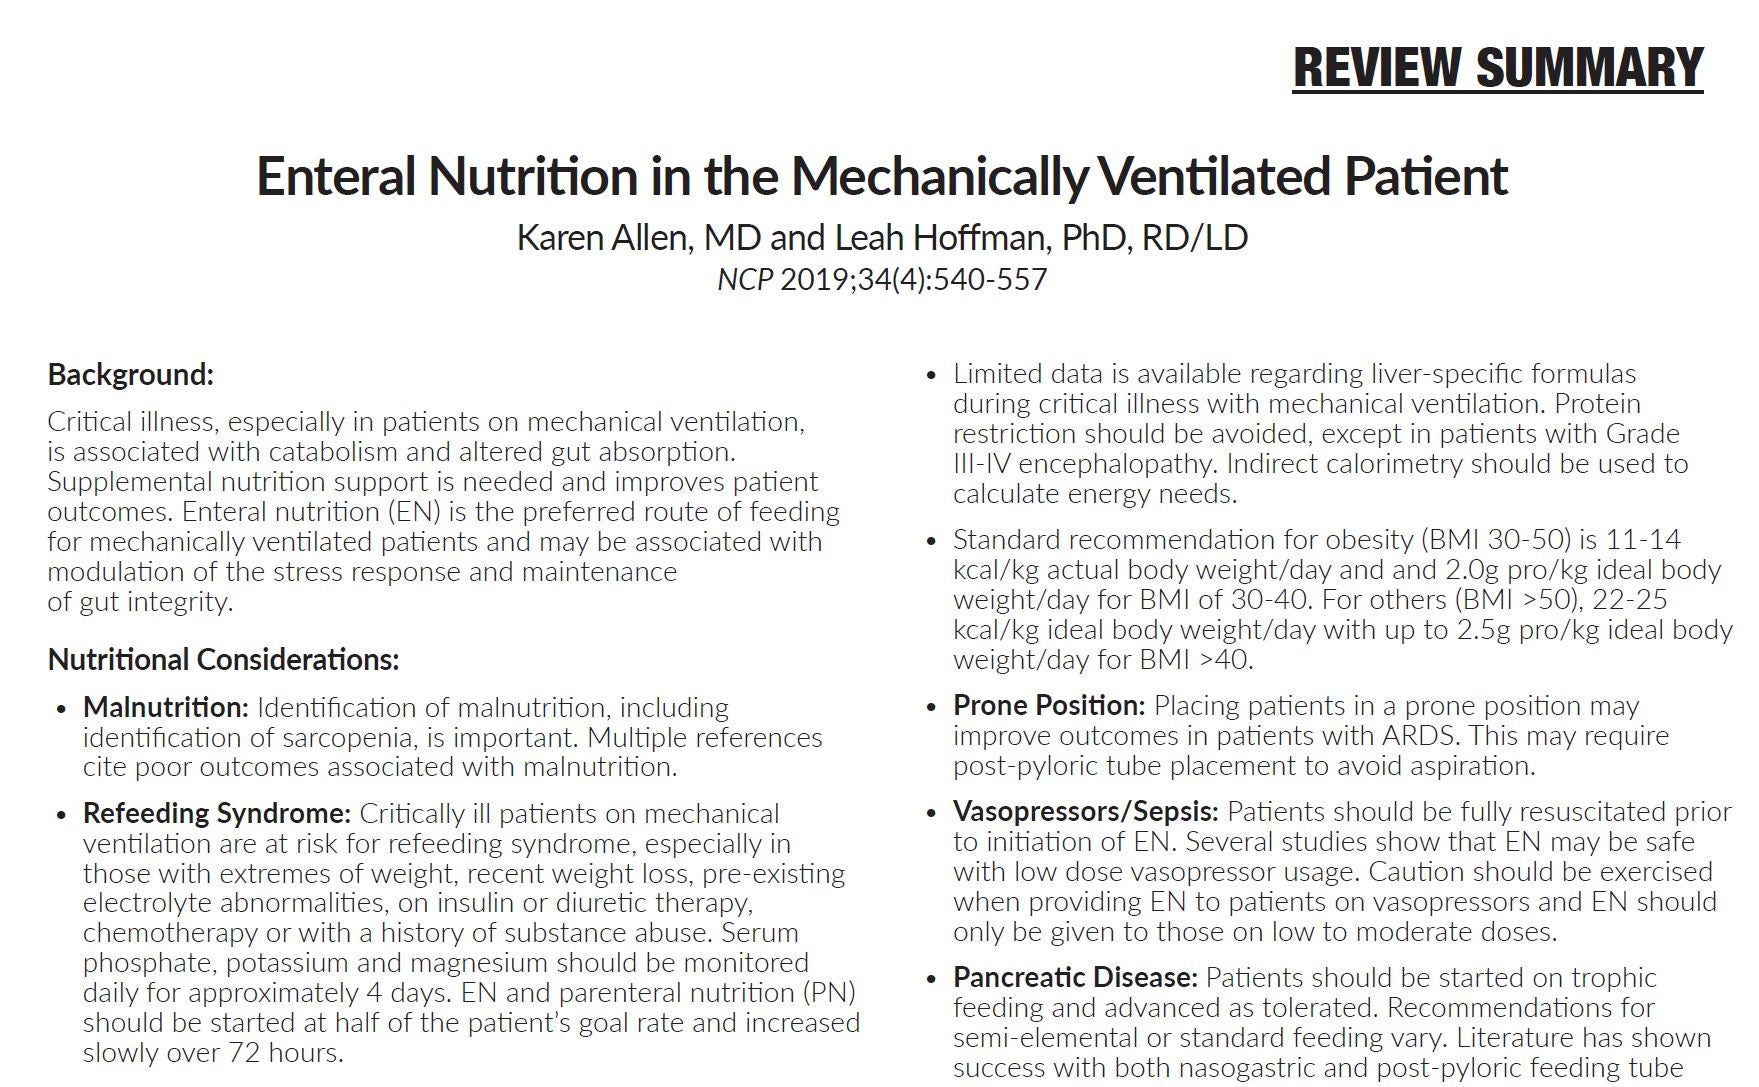 Enteral Nutrition in the Mechanically Ventilated Patient Allen Review Paper